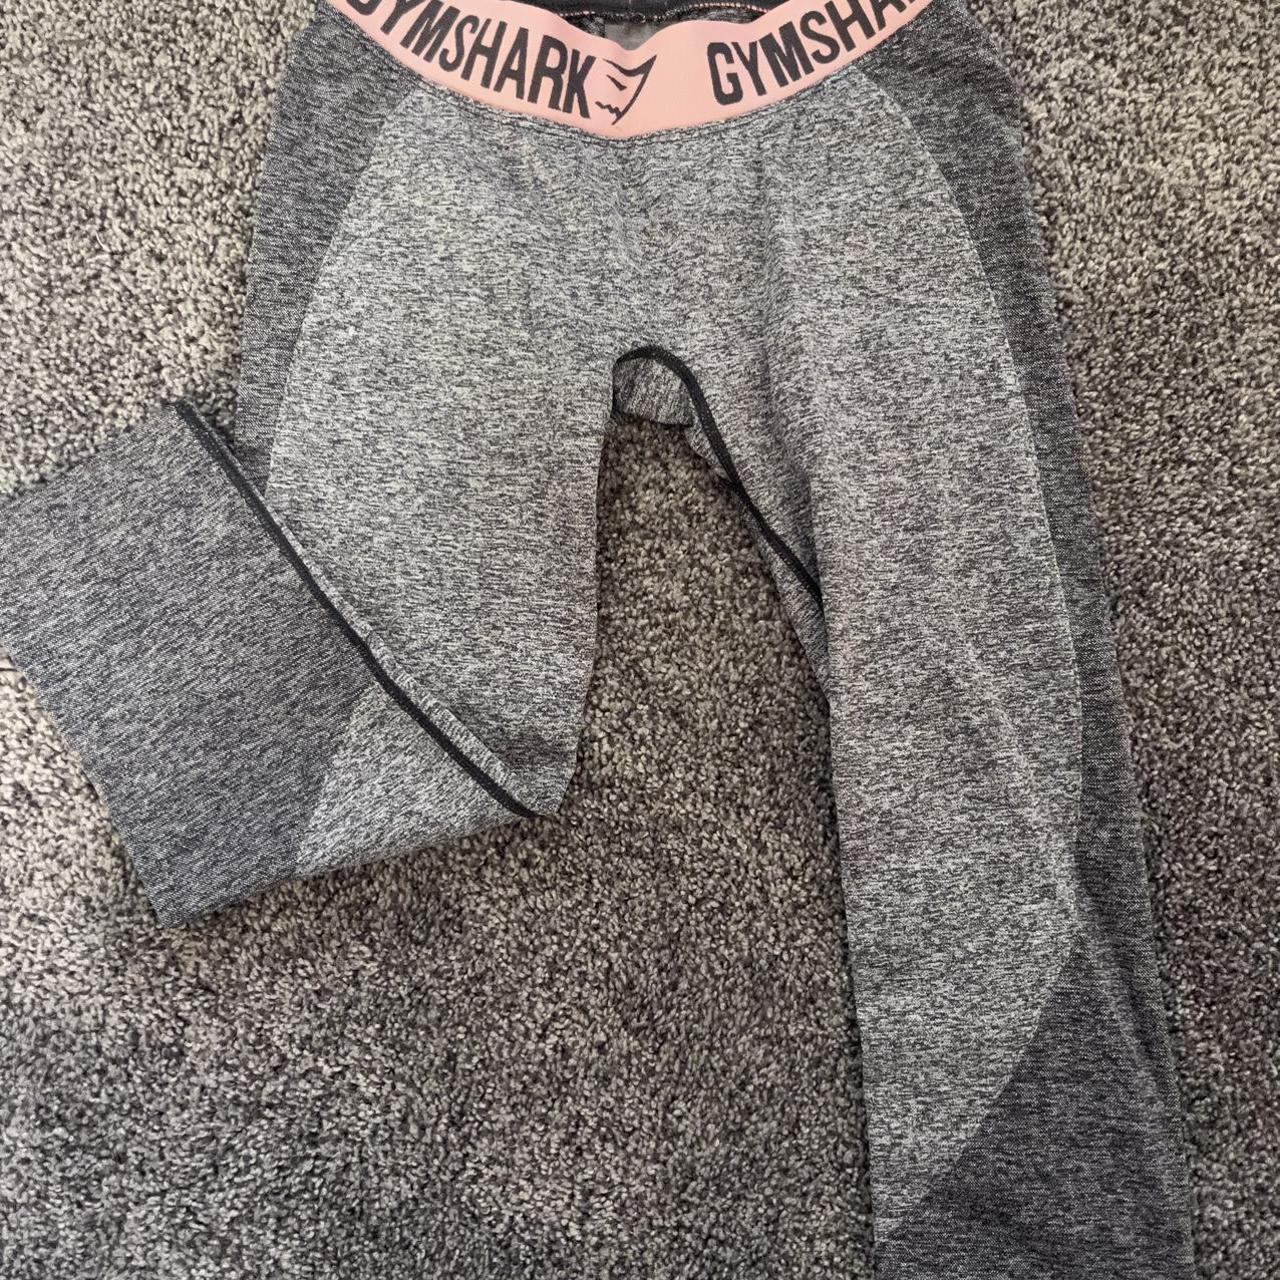 Damaged gym shark leggings they are brand new but - Depop